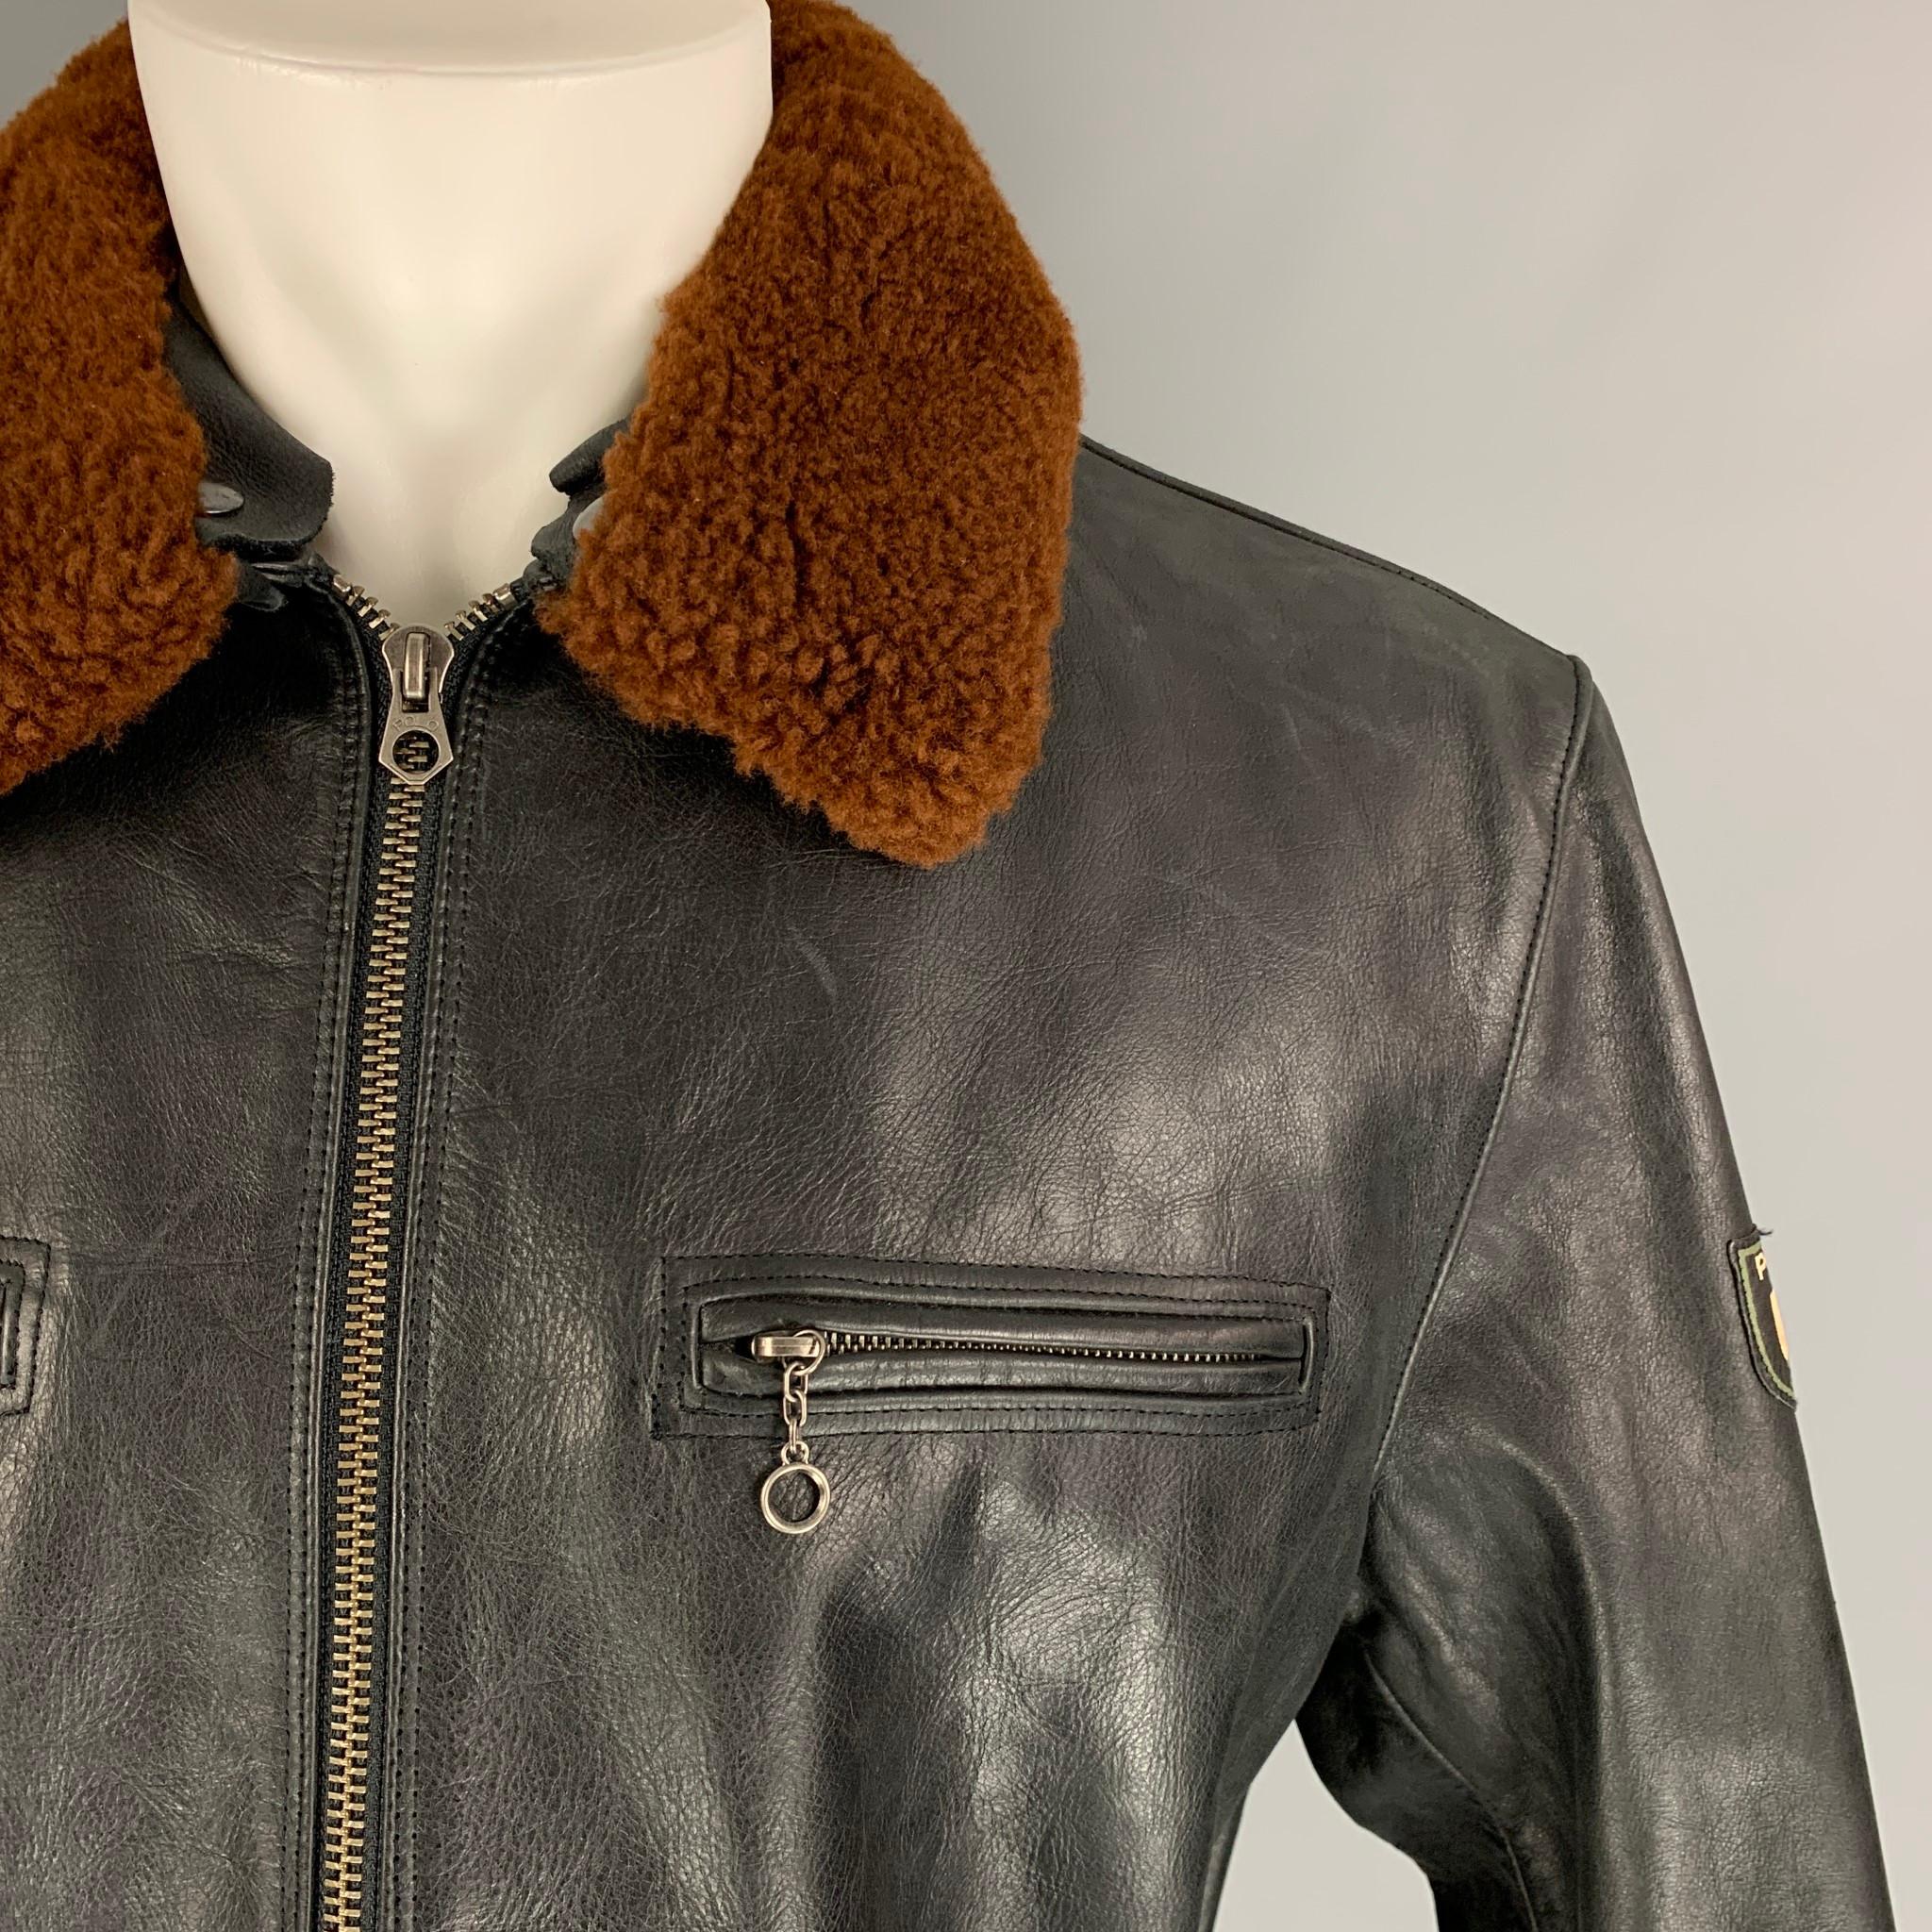 POLO by RALPH LAUREN jacket comes in a black leather with a full liner featuring a brown detachable shearling collar, side zipper details, zipped cuffs, front zipper pockets, and a full zip up closure. 

Very Good Pre-Owned Condition.
Marked: